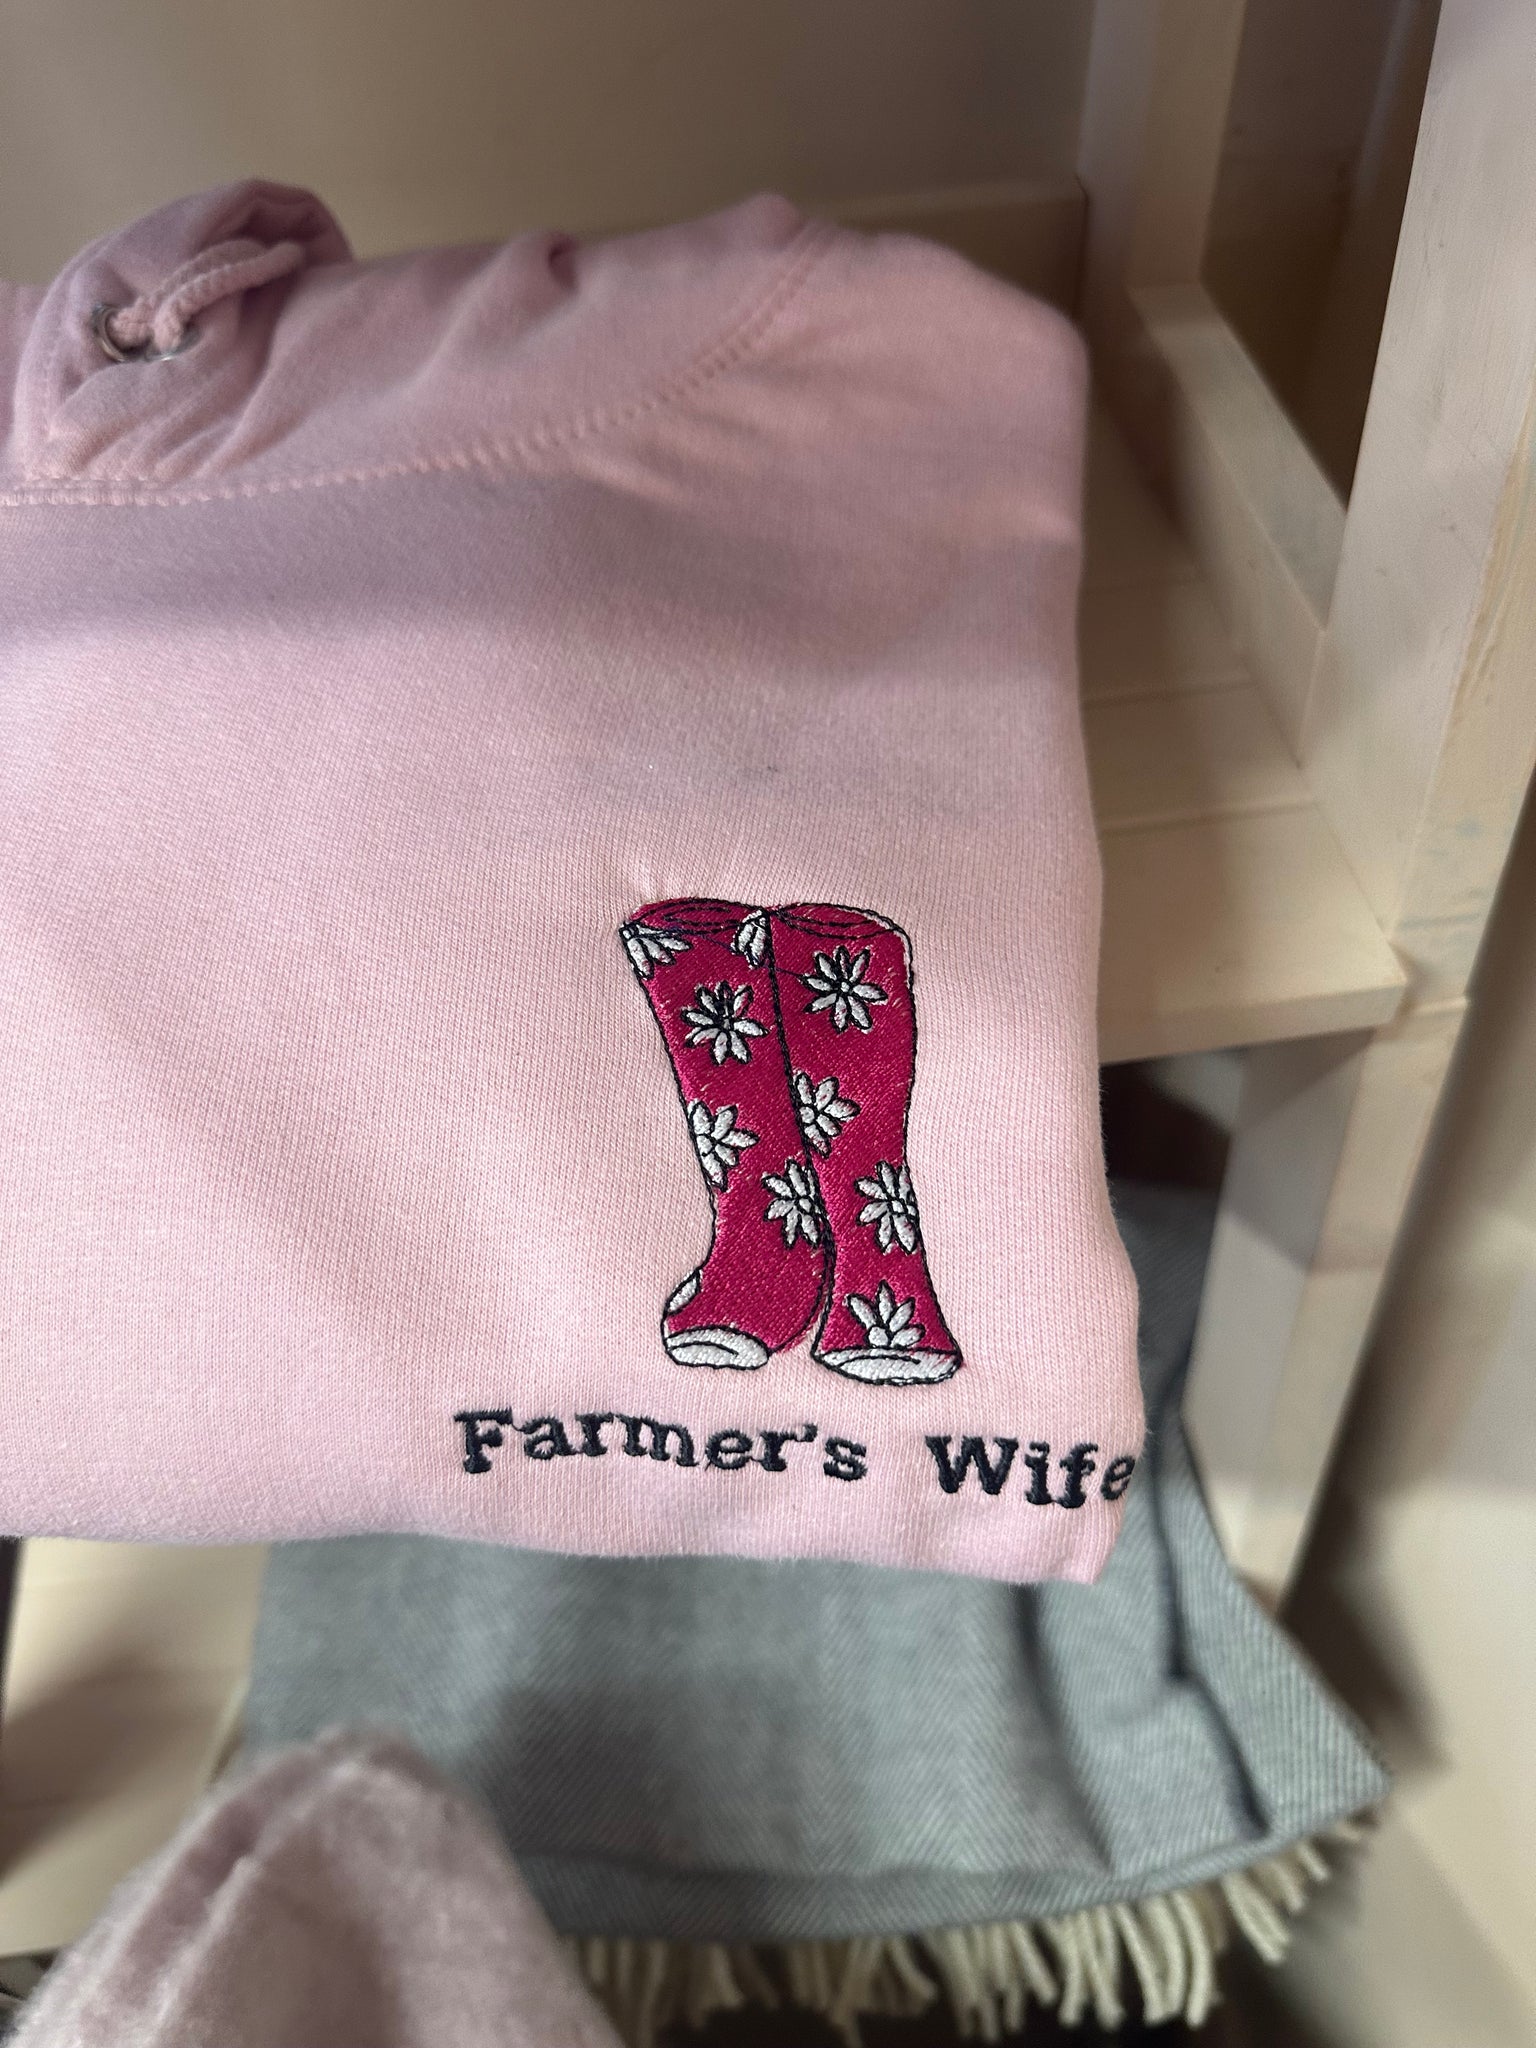 SAMPLE SALE 'Farmer's Wife' Baby Pink Hoodie Size L